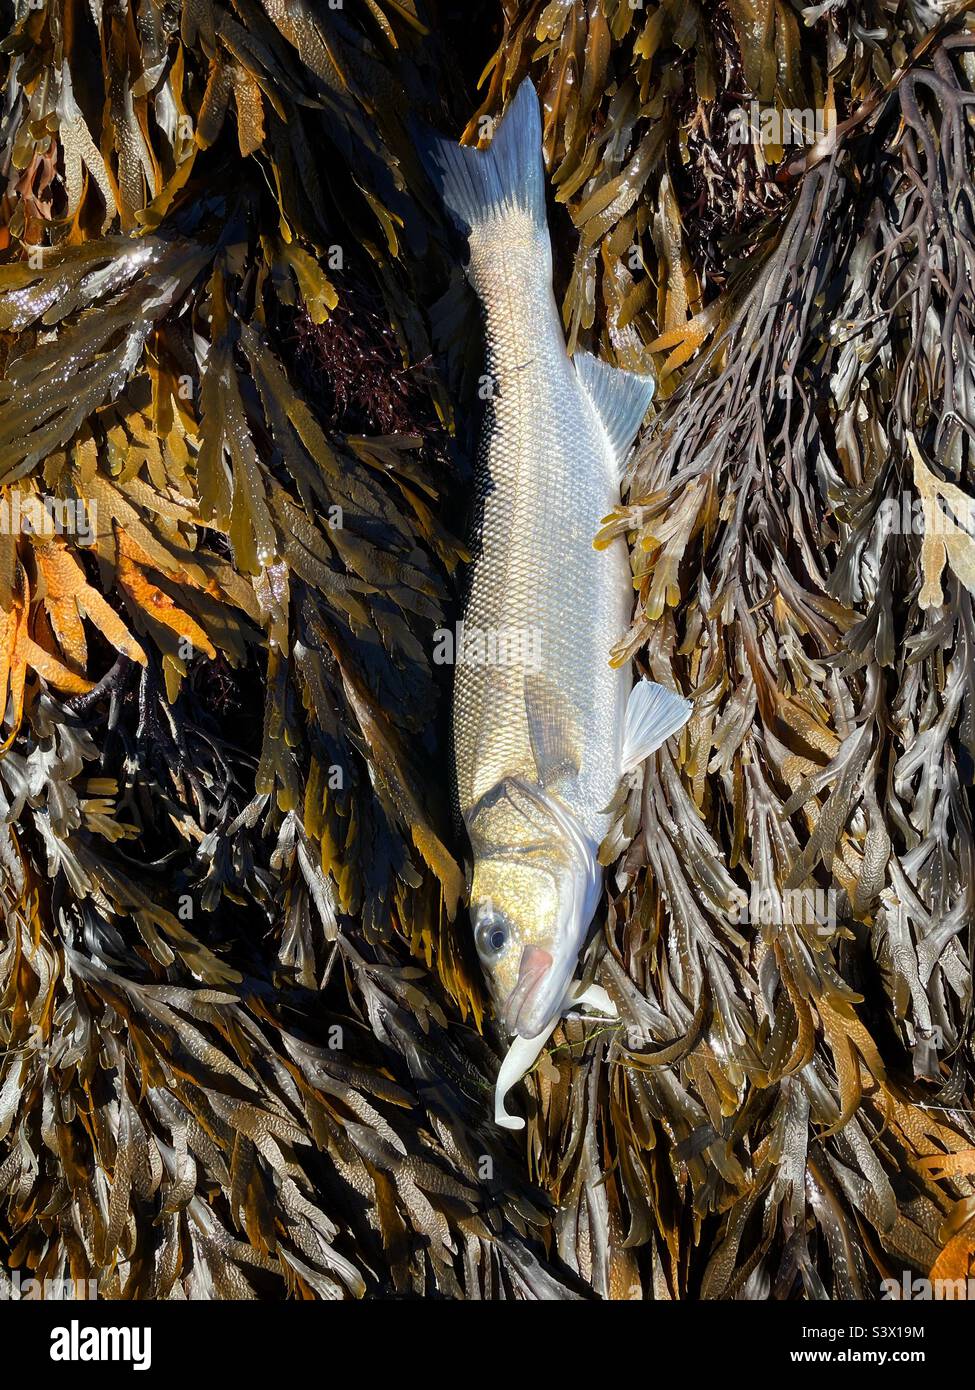 Freshly caught bass ( Dicentrarchus labrax) from Southwest Ireland lying on a bed of seaweed (serrated wrack). Stock Photo